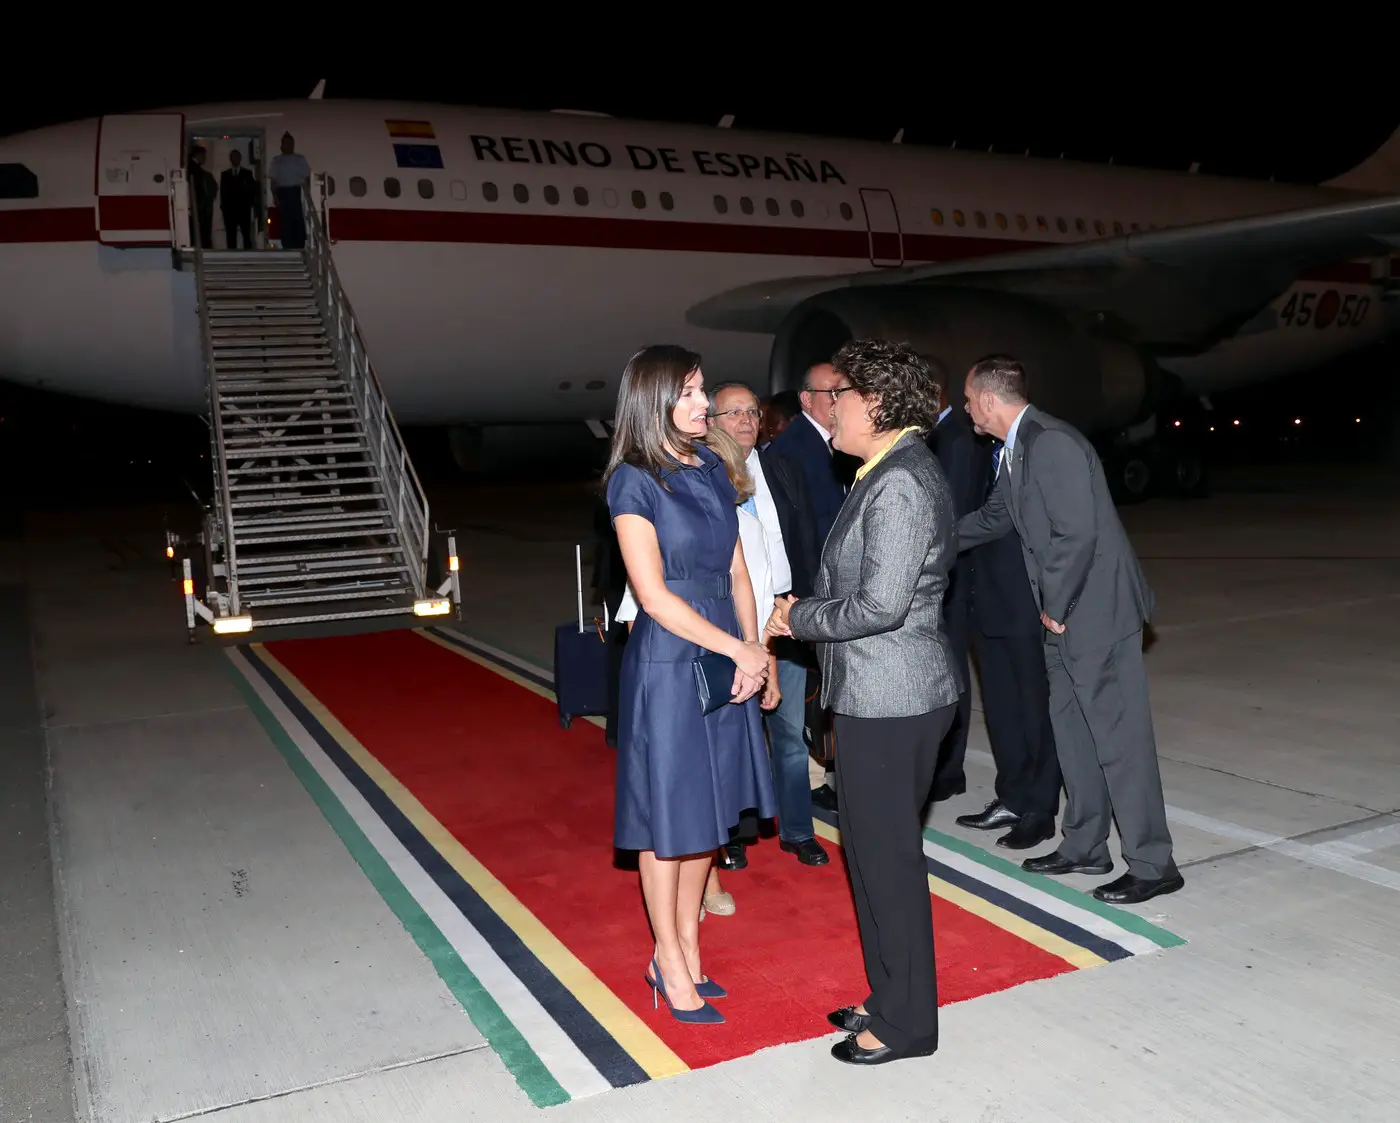 Queen Letizia of Spain arrived in Mozambique for cooperation visit